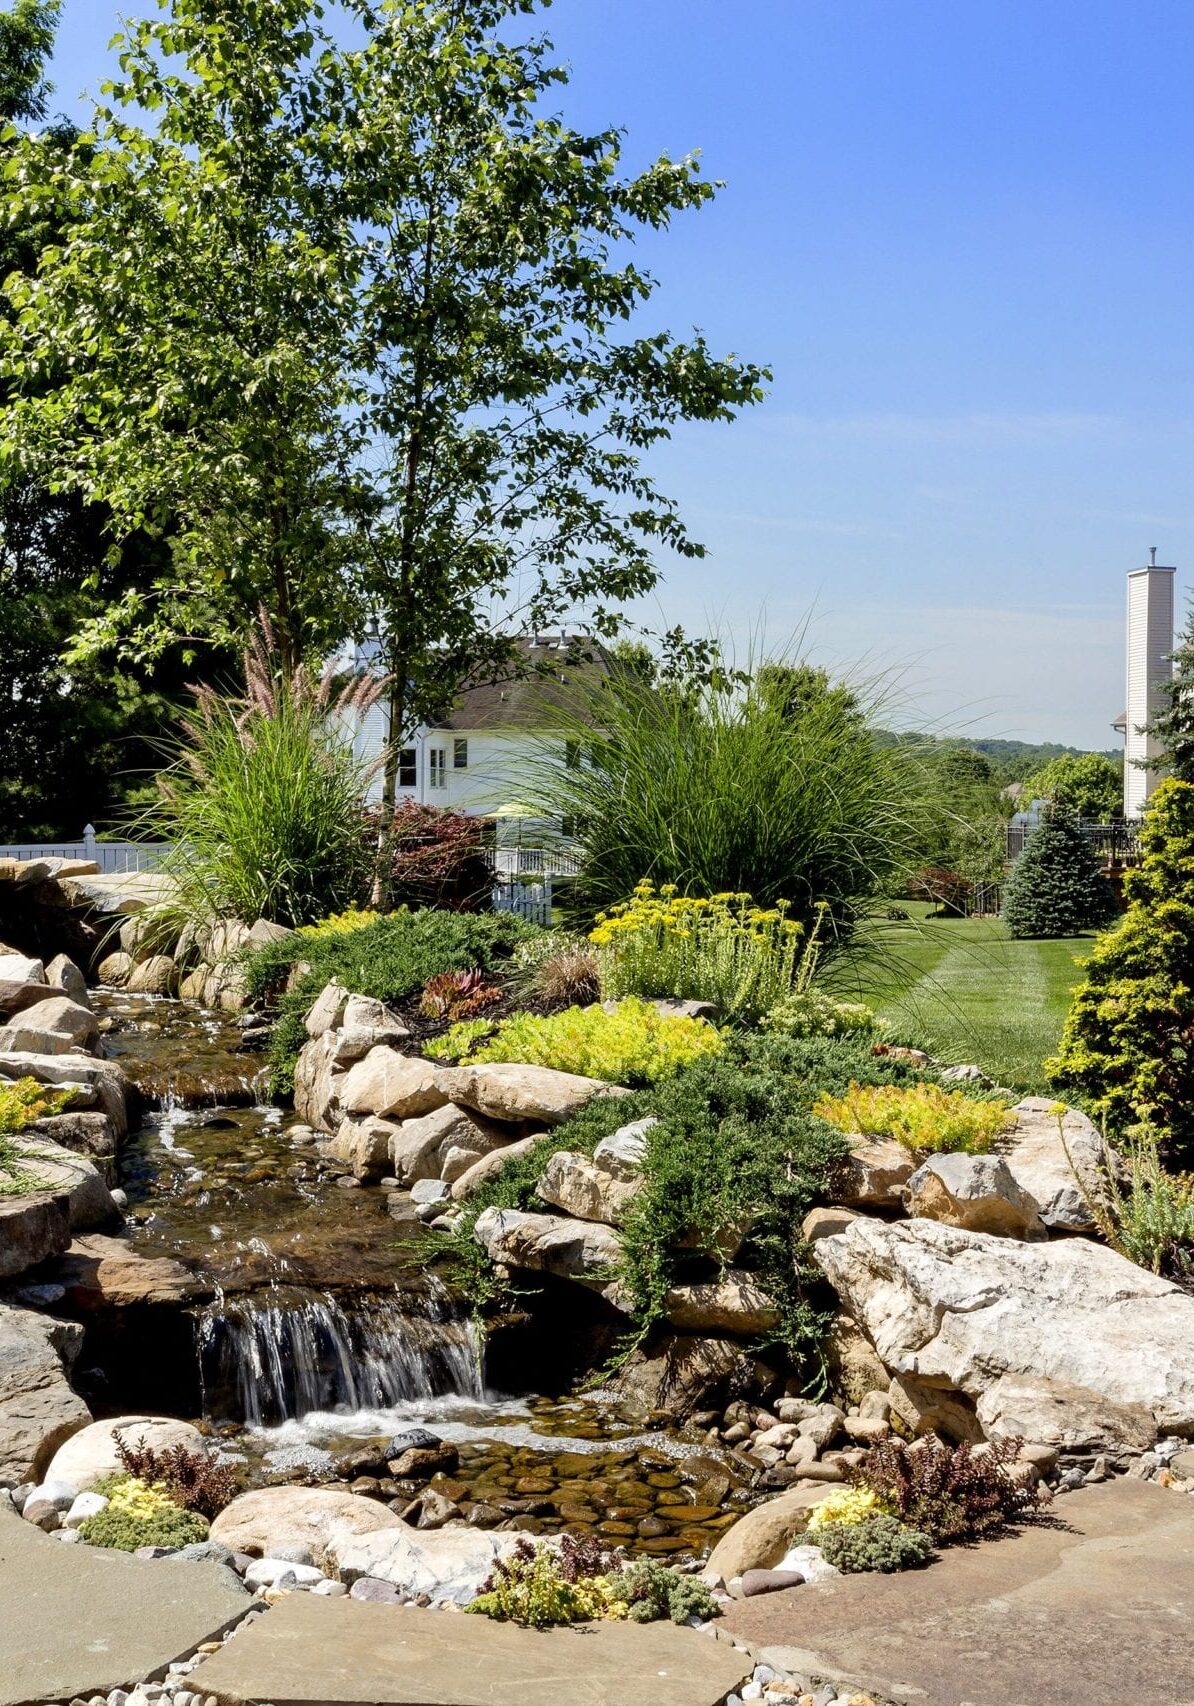 Westfield, New Jersey Landscaping Services